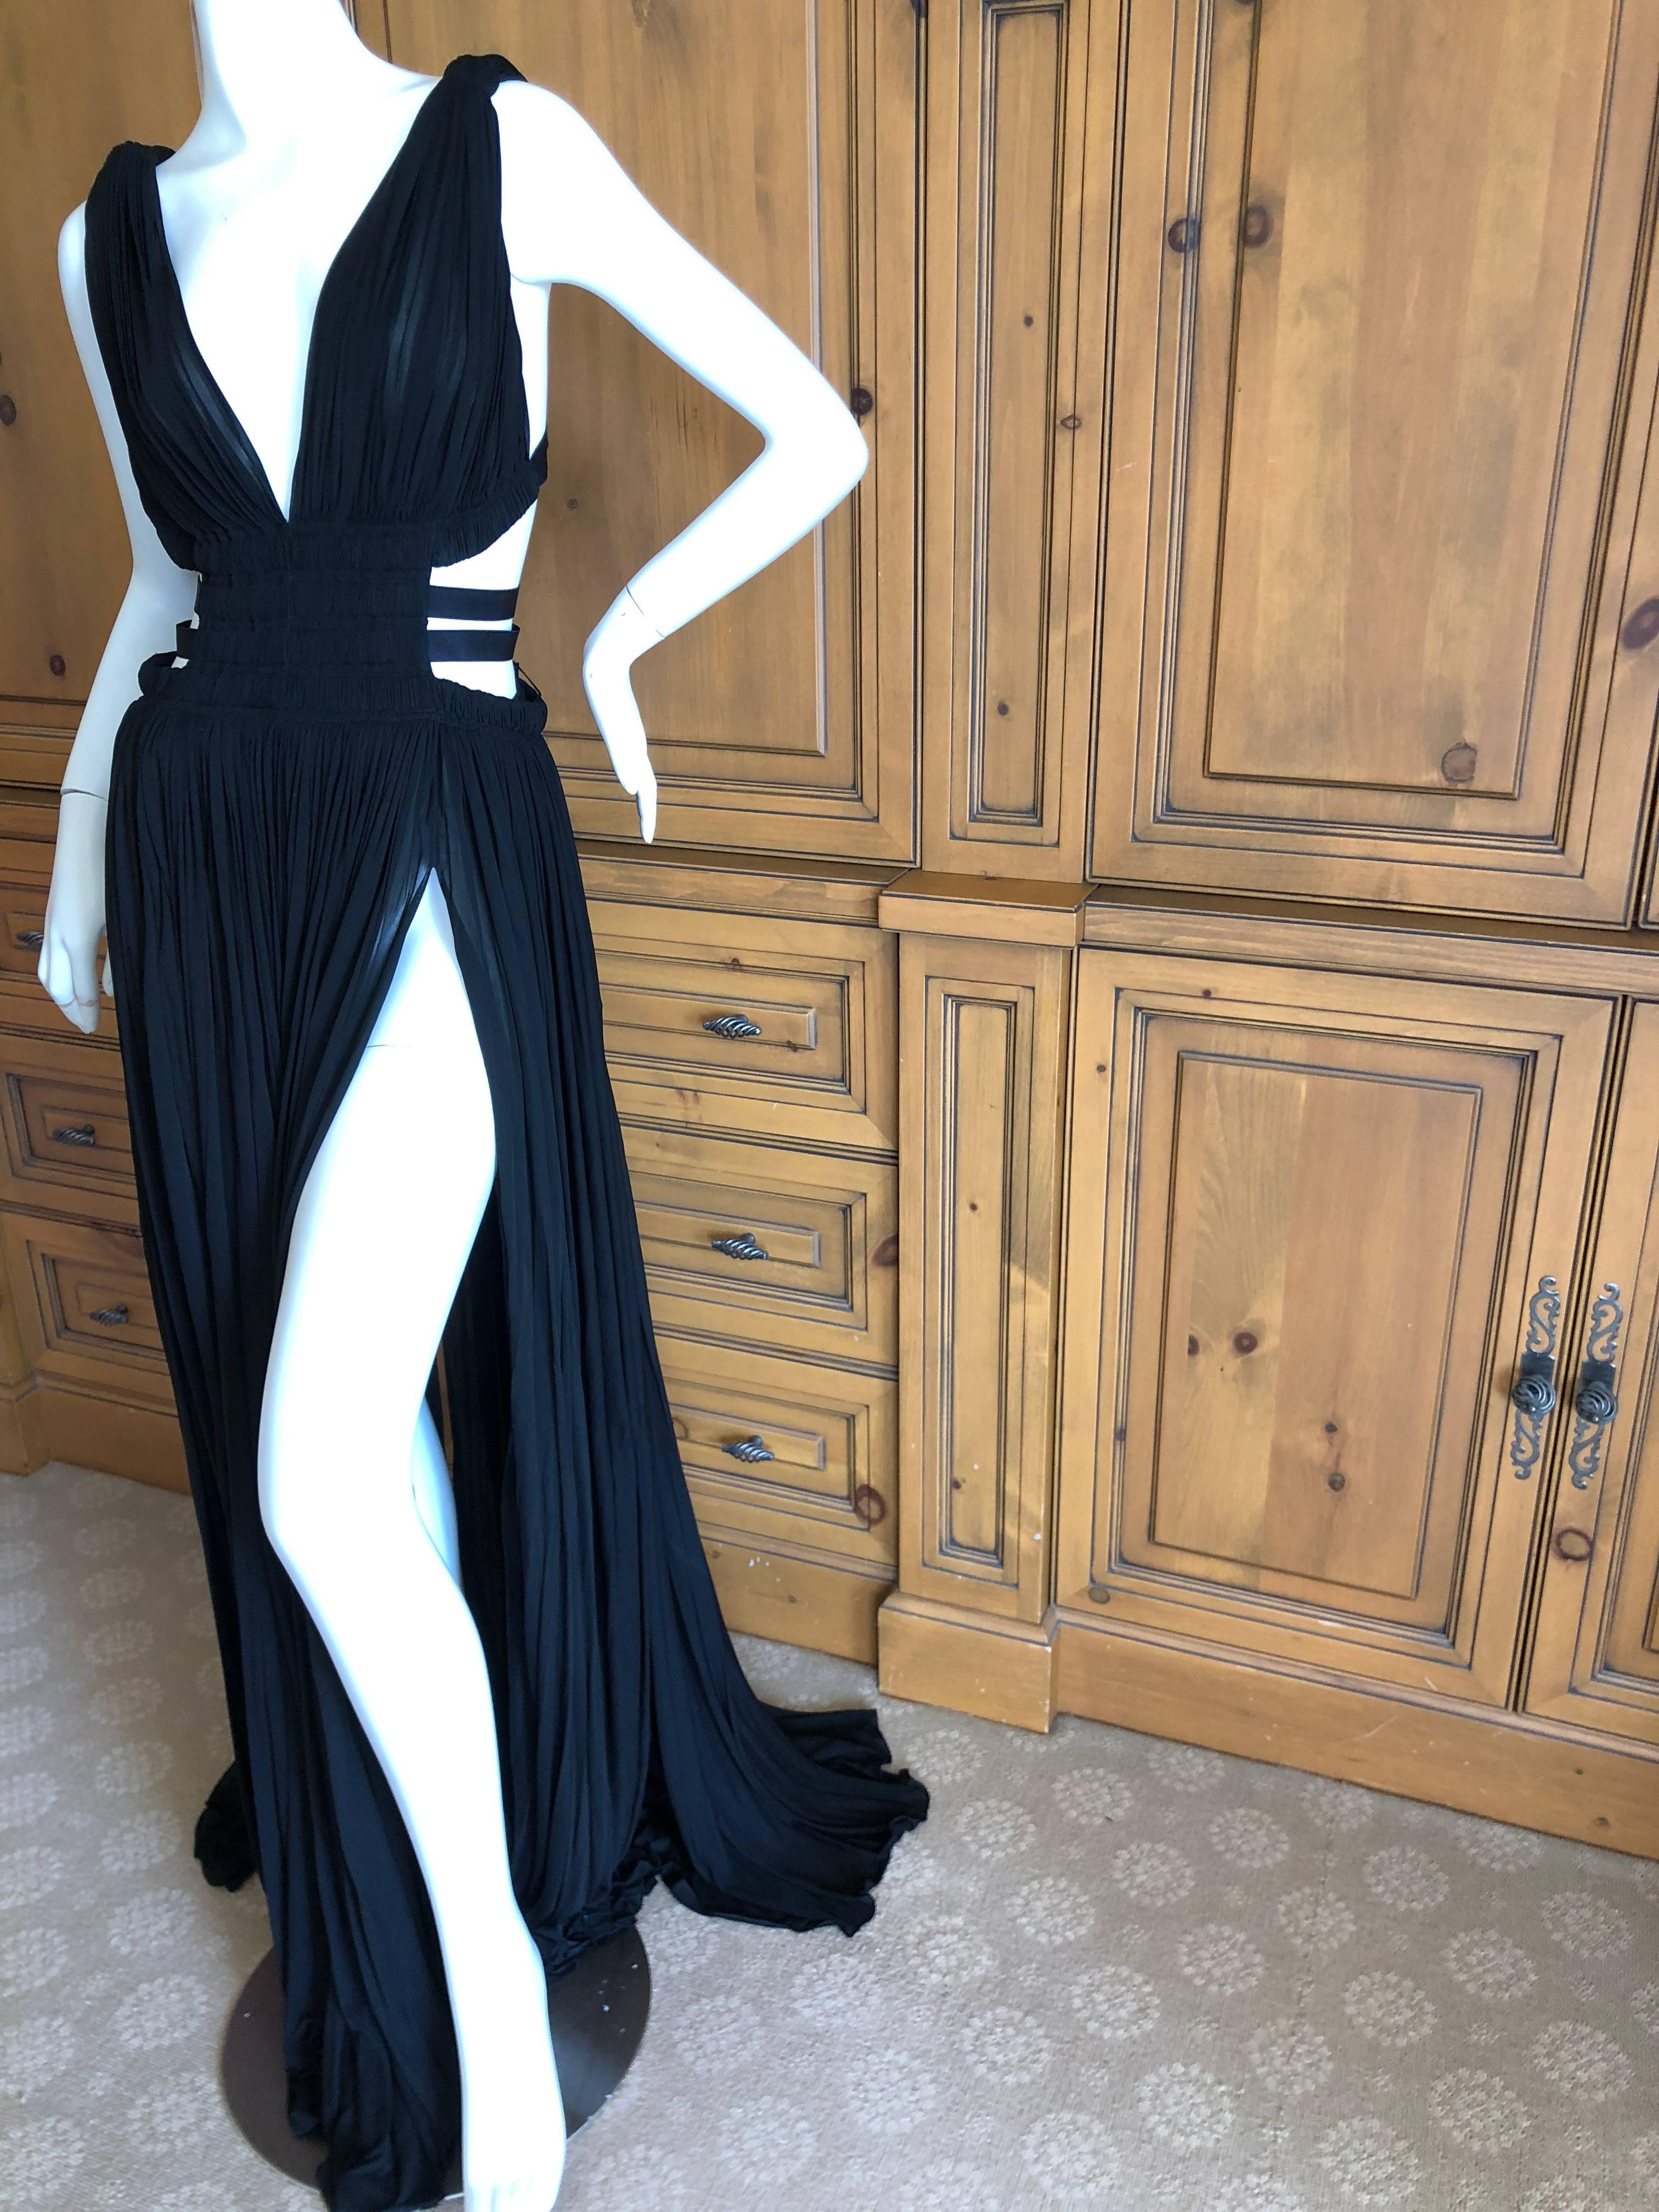 Azzedine Alaia Vintage Autumn 1991 Black Pleated Goddess Gown with side straps
 Please see all the great vintage Alaia in my store.
This appears to never have been worn and is extremely long
 Size 40
 Bust 36